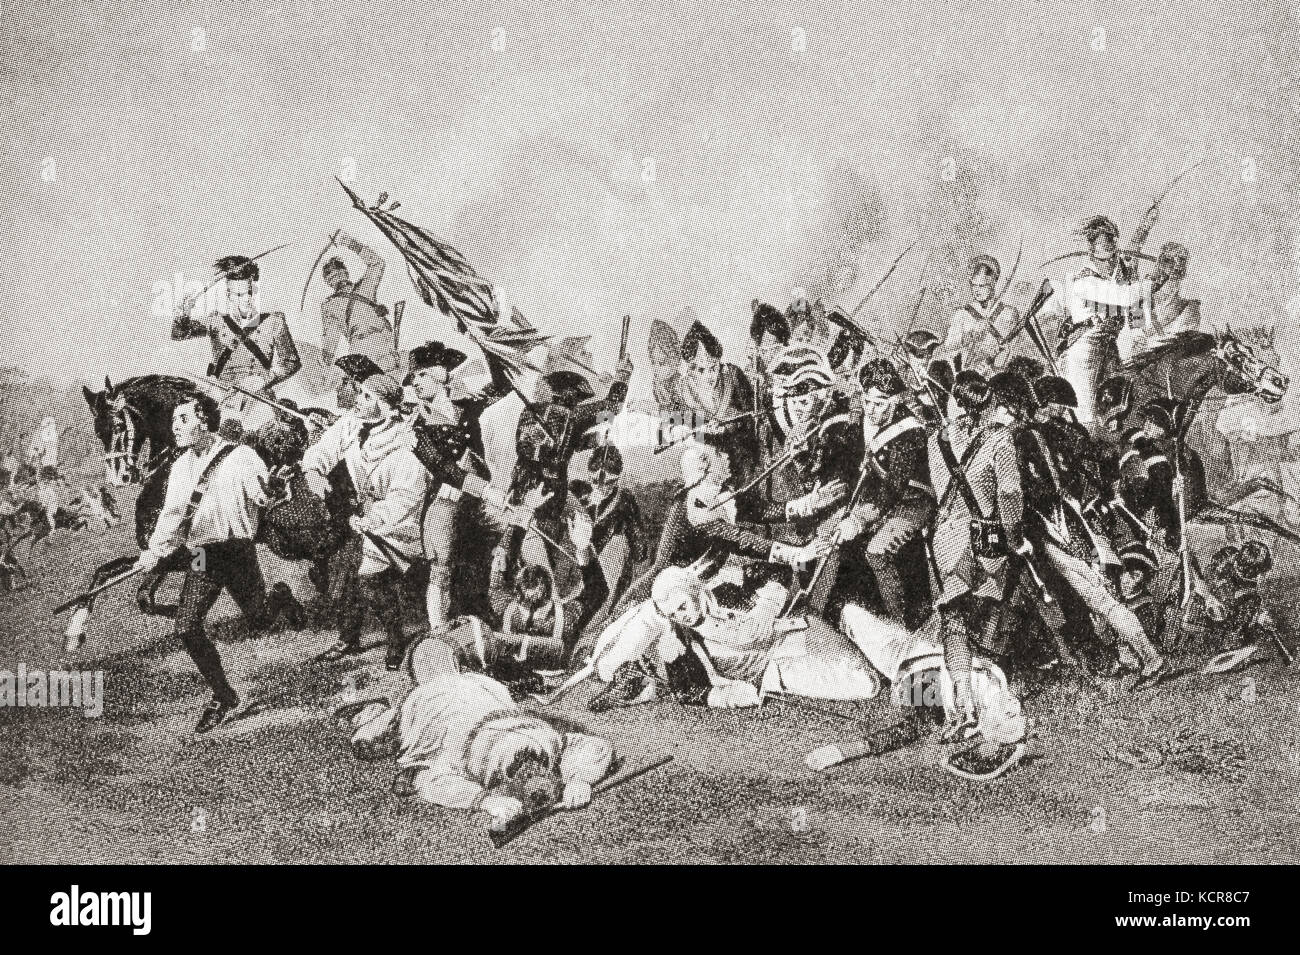 The death of Johann de Kalb,1780, at the Battle of Camden during theAmerican Revolutionary War. Johann von Robais, Baron de Kalb, 1721 – 1780, born Johann Kalb.  Bavarian-French military officer who served as a major general in the Continental Army during the American Revolutionary War.  From Hutchinson's History of the Nations, published 1915. Stock Photo